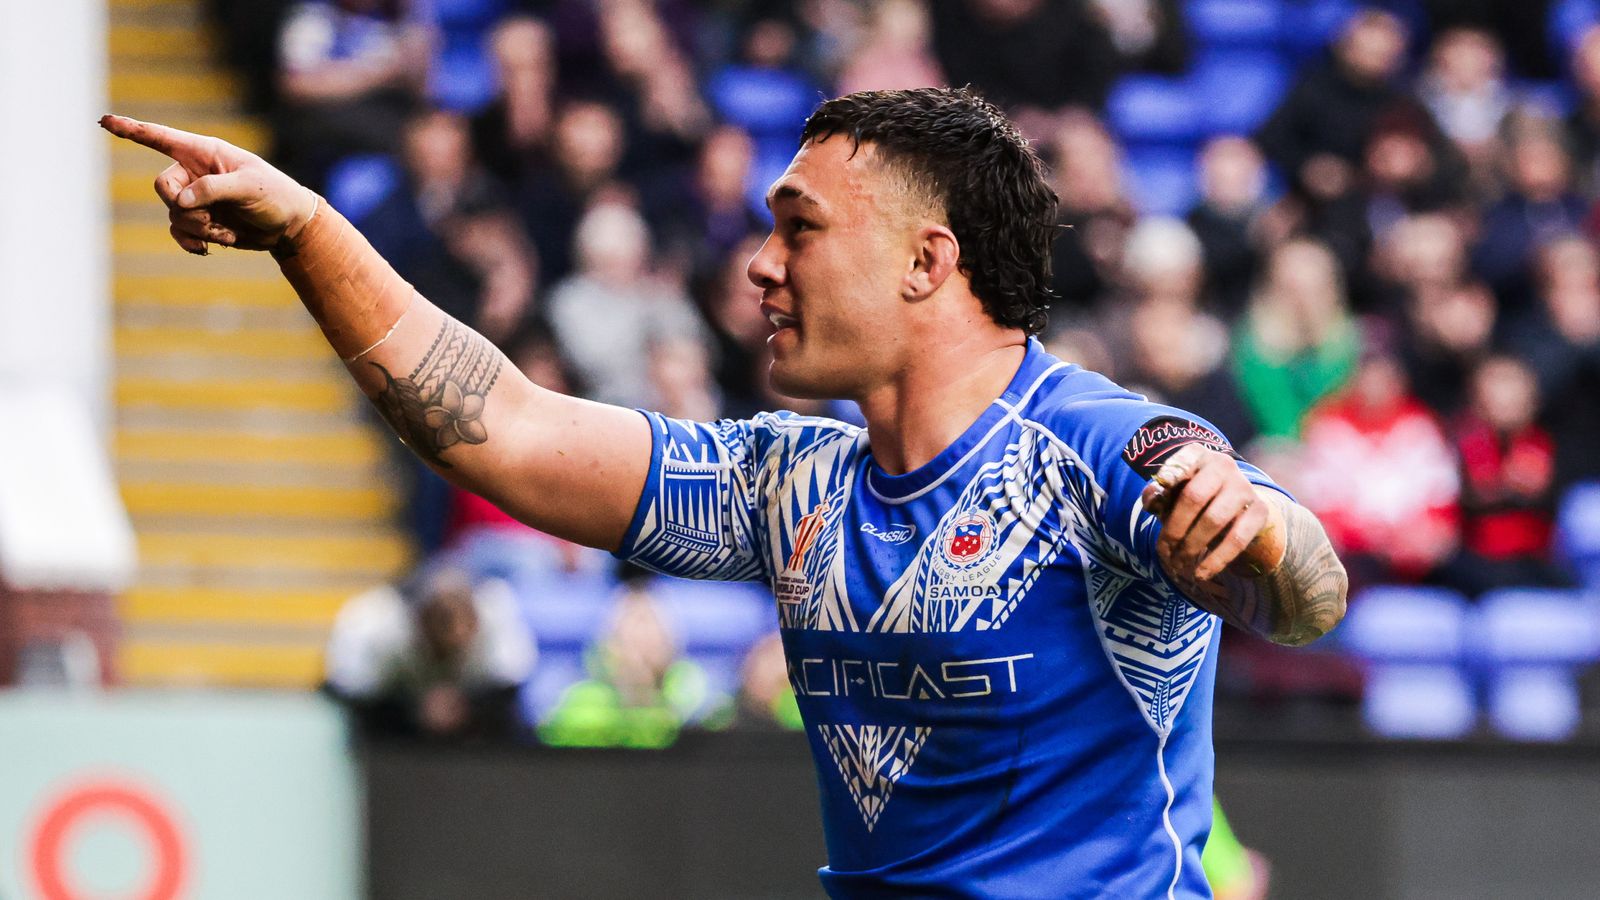 Rugby League World Cup: Samoa stun Tonga with 20-18 win to set up England rematch in semi-finals